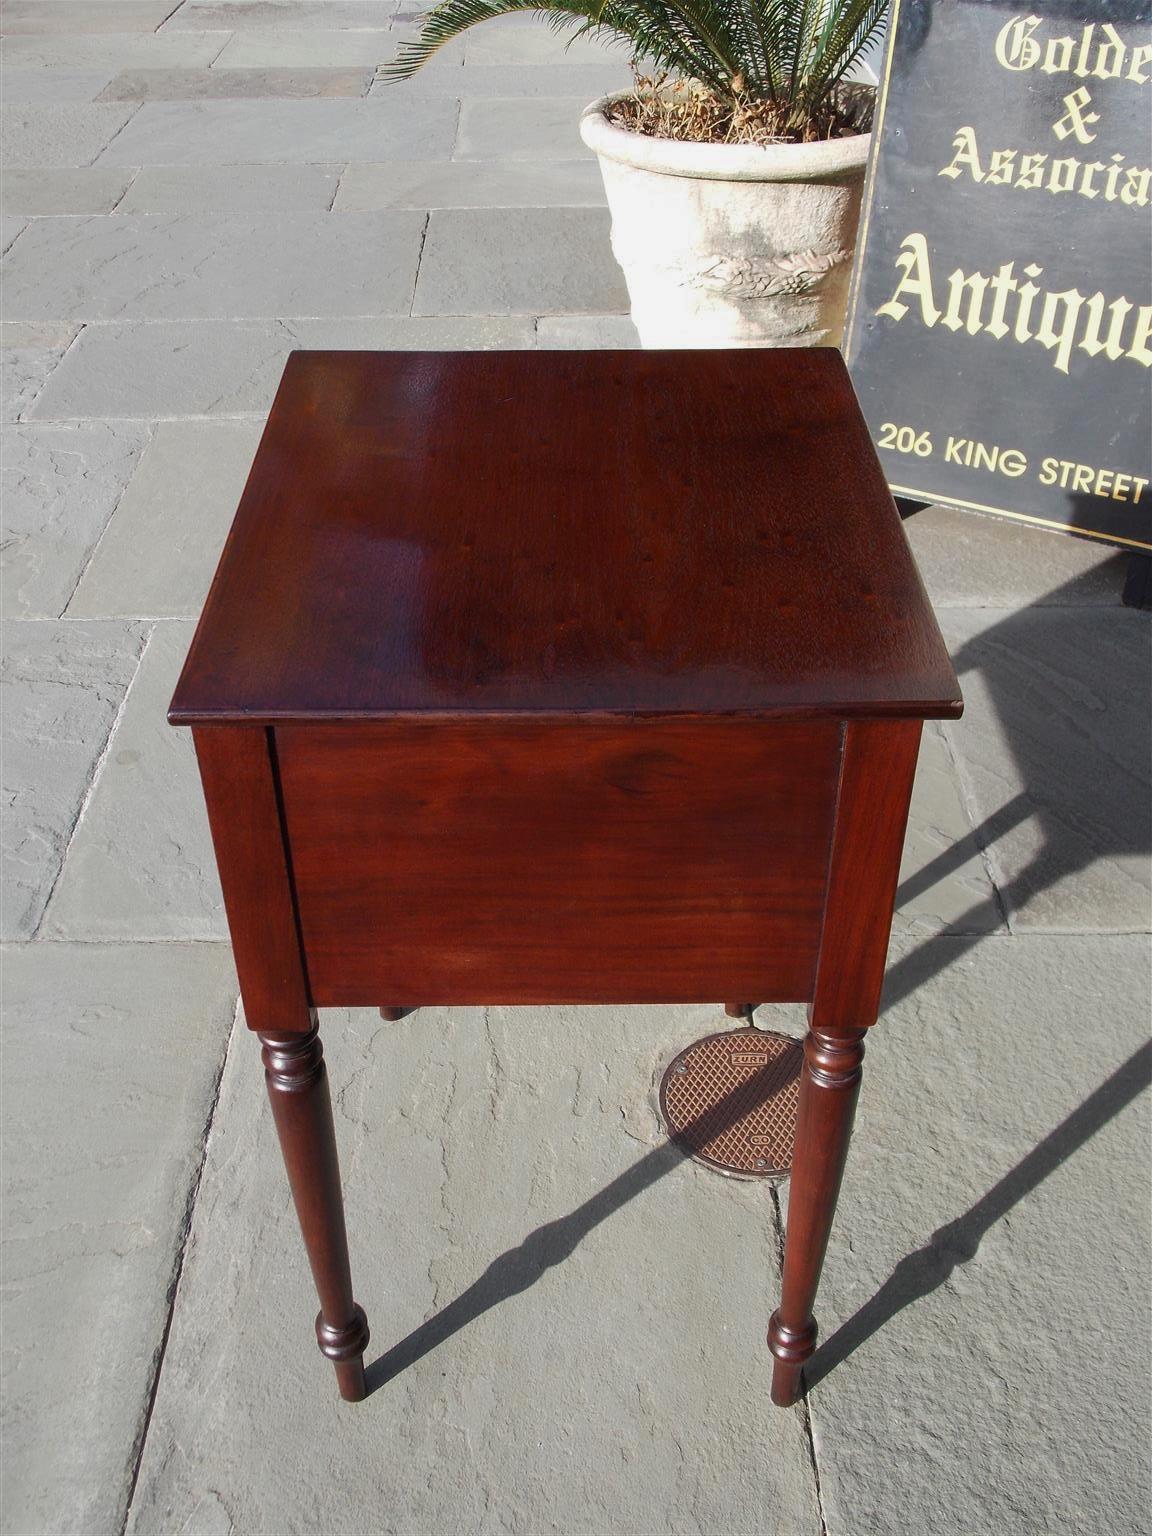 Early 19th Century American Sheraton Mahogany Hinged Side Table with Turned Bulbous Legs, C. 1820 For Sale